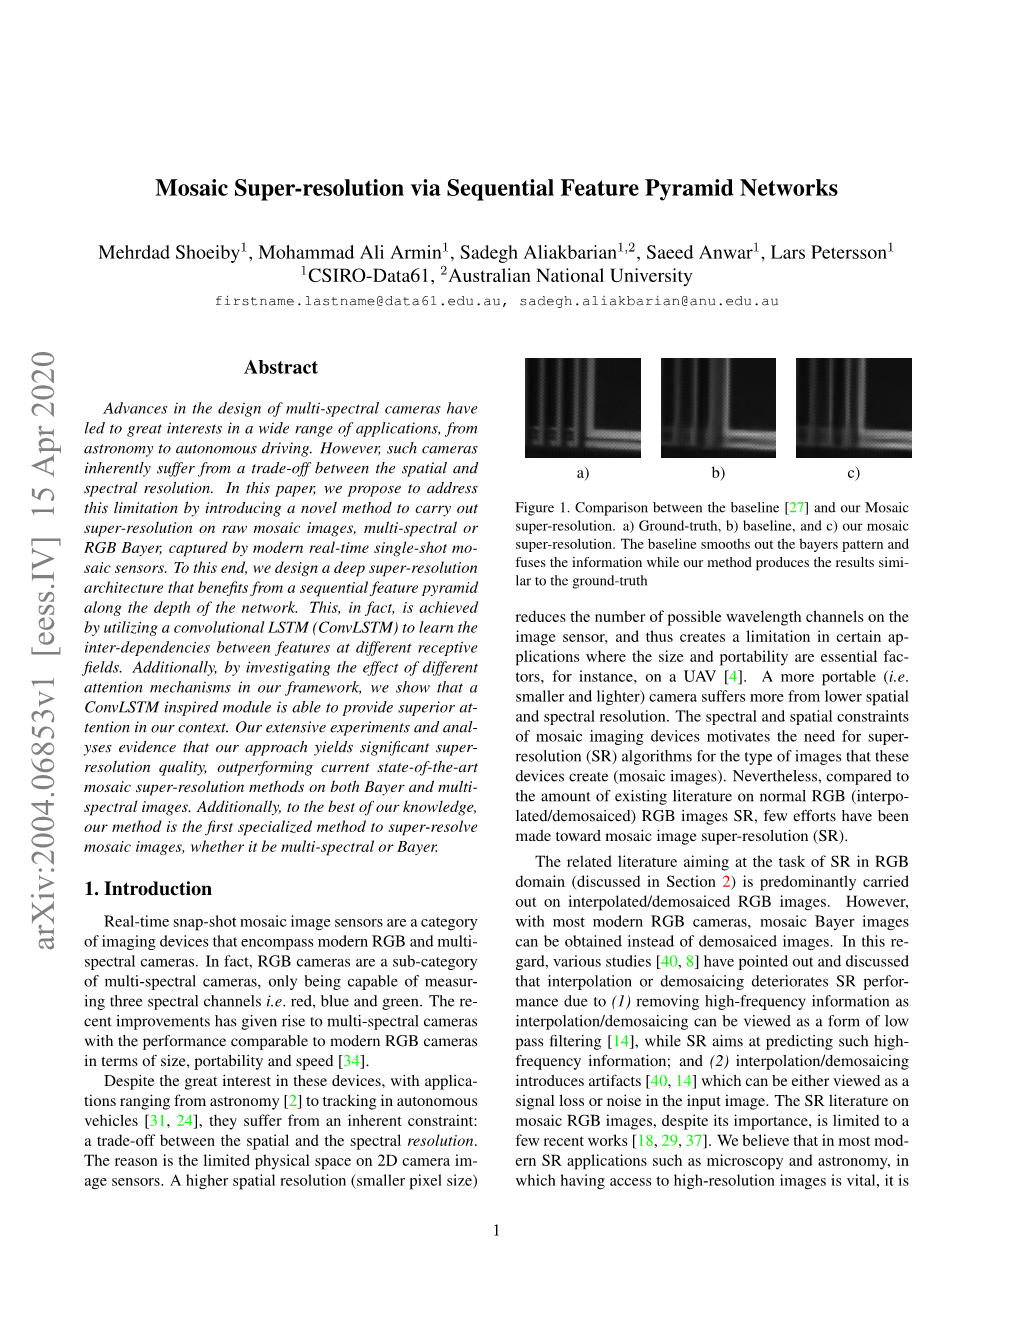 Mosaic Super-Resolution Via Sequential Feature Pyramid Networks